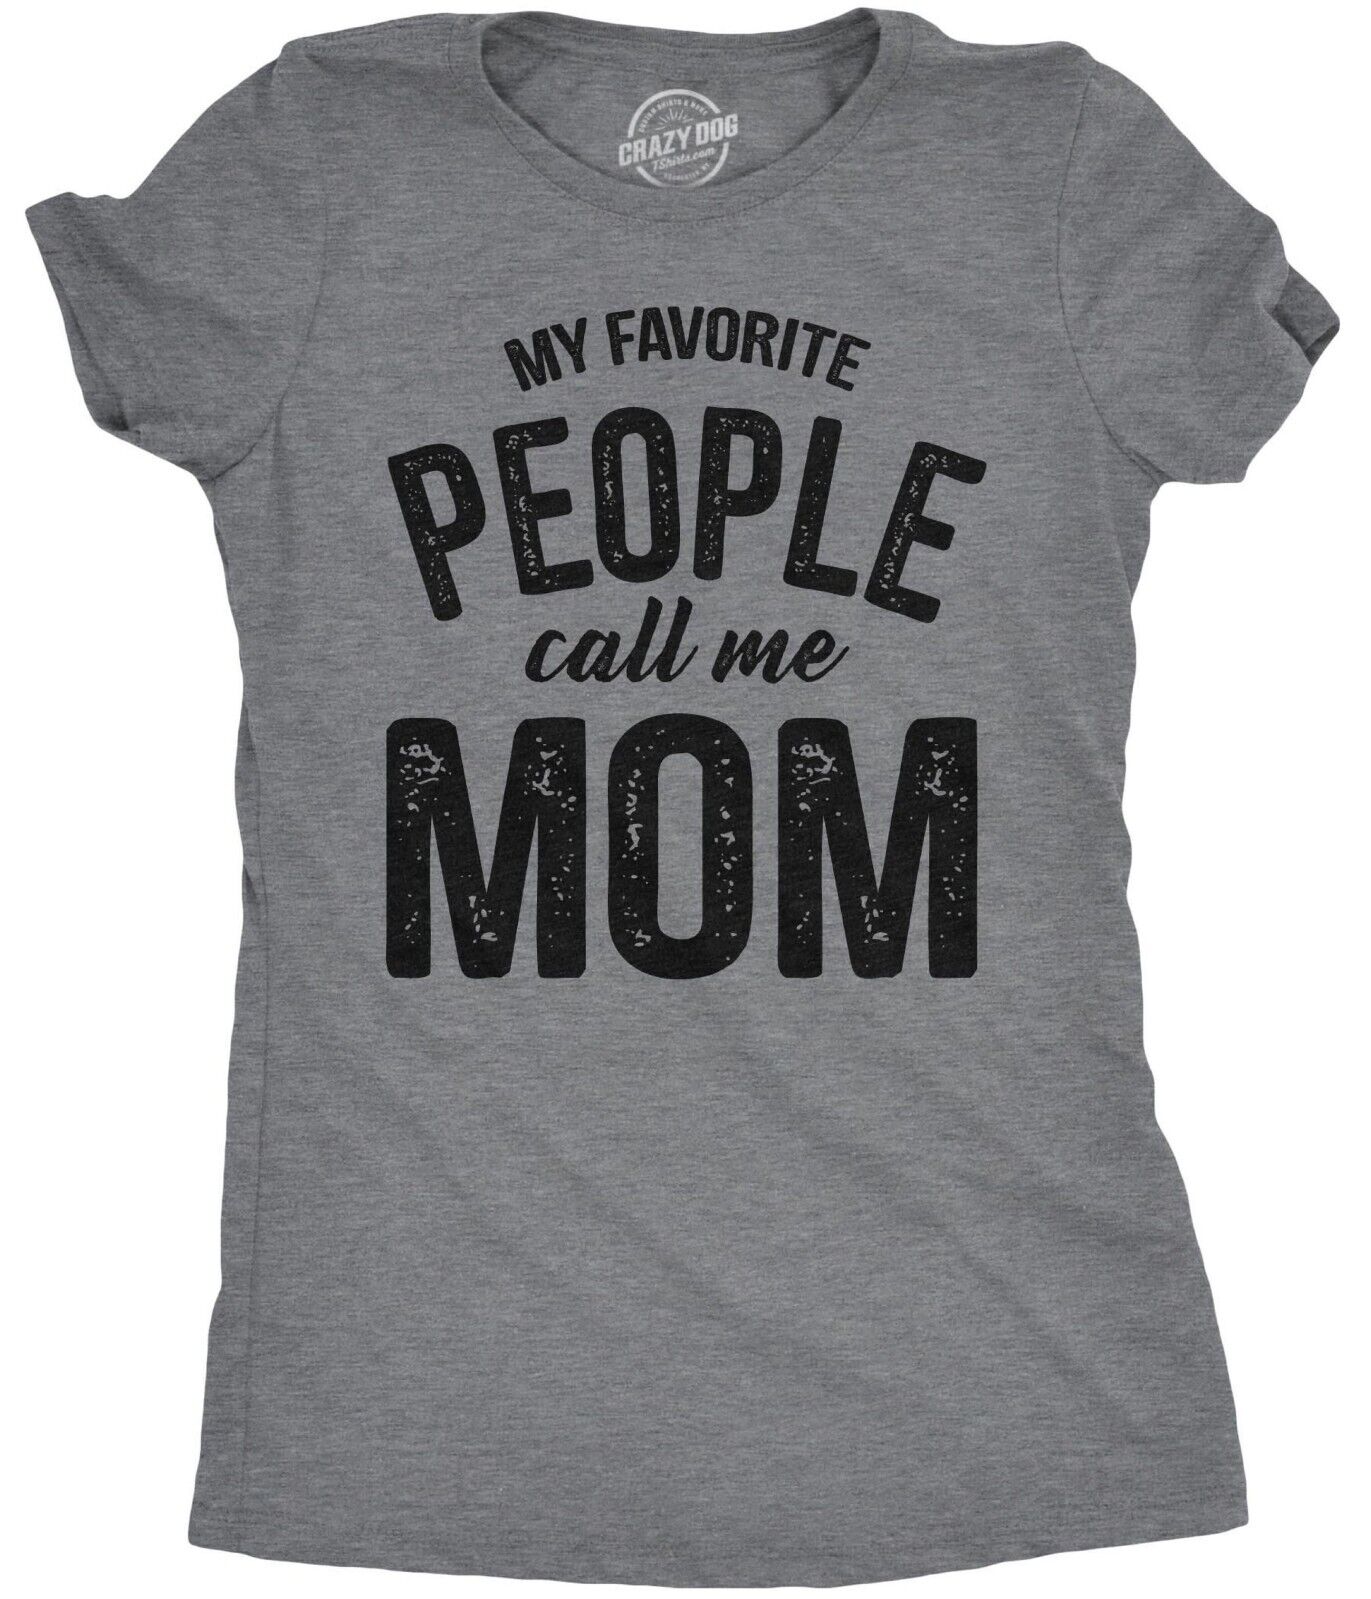 My Favorite People Call Me Mom Shirt, Mother's Day Tee, Leopard Bleach